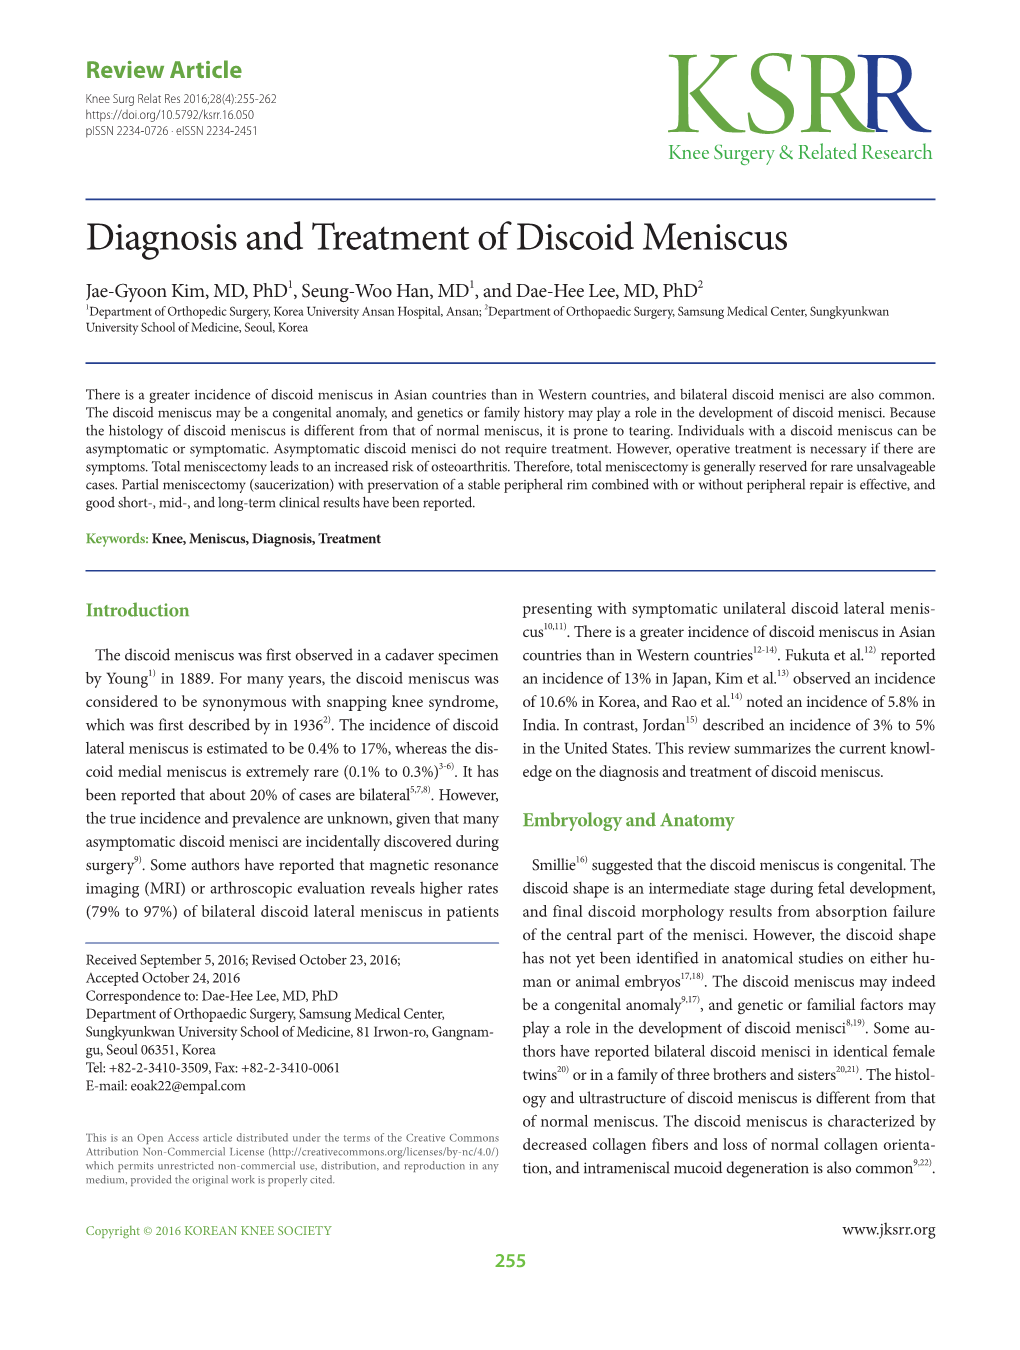 Diagnosis and Treatment of Discoid Meniscus